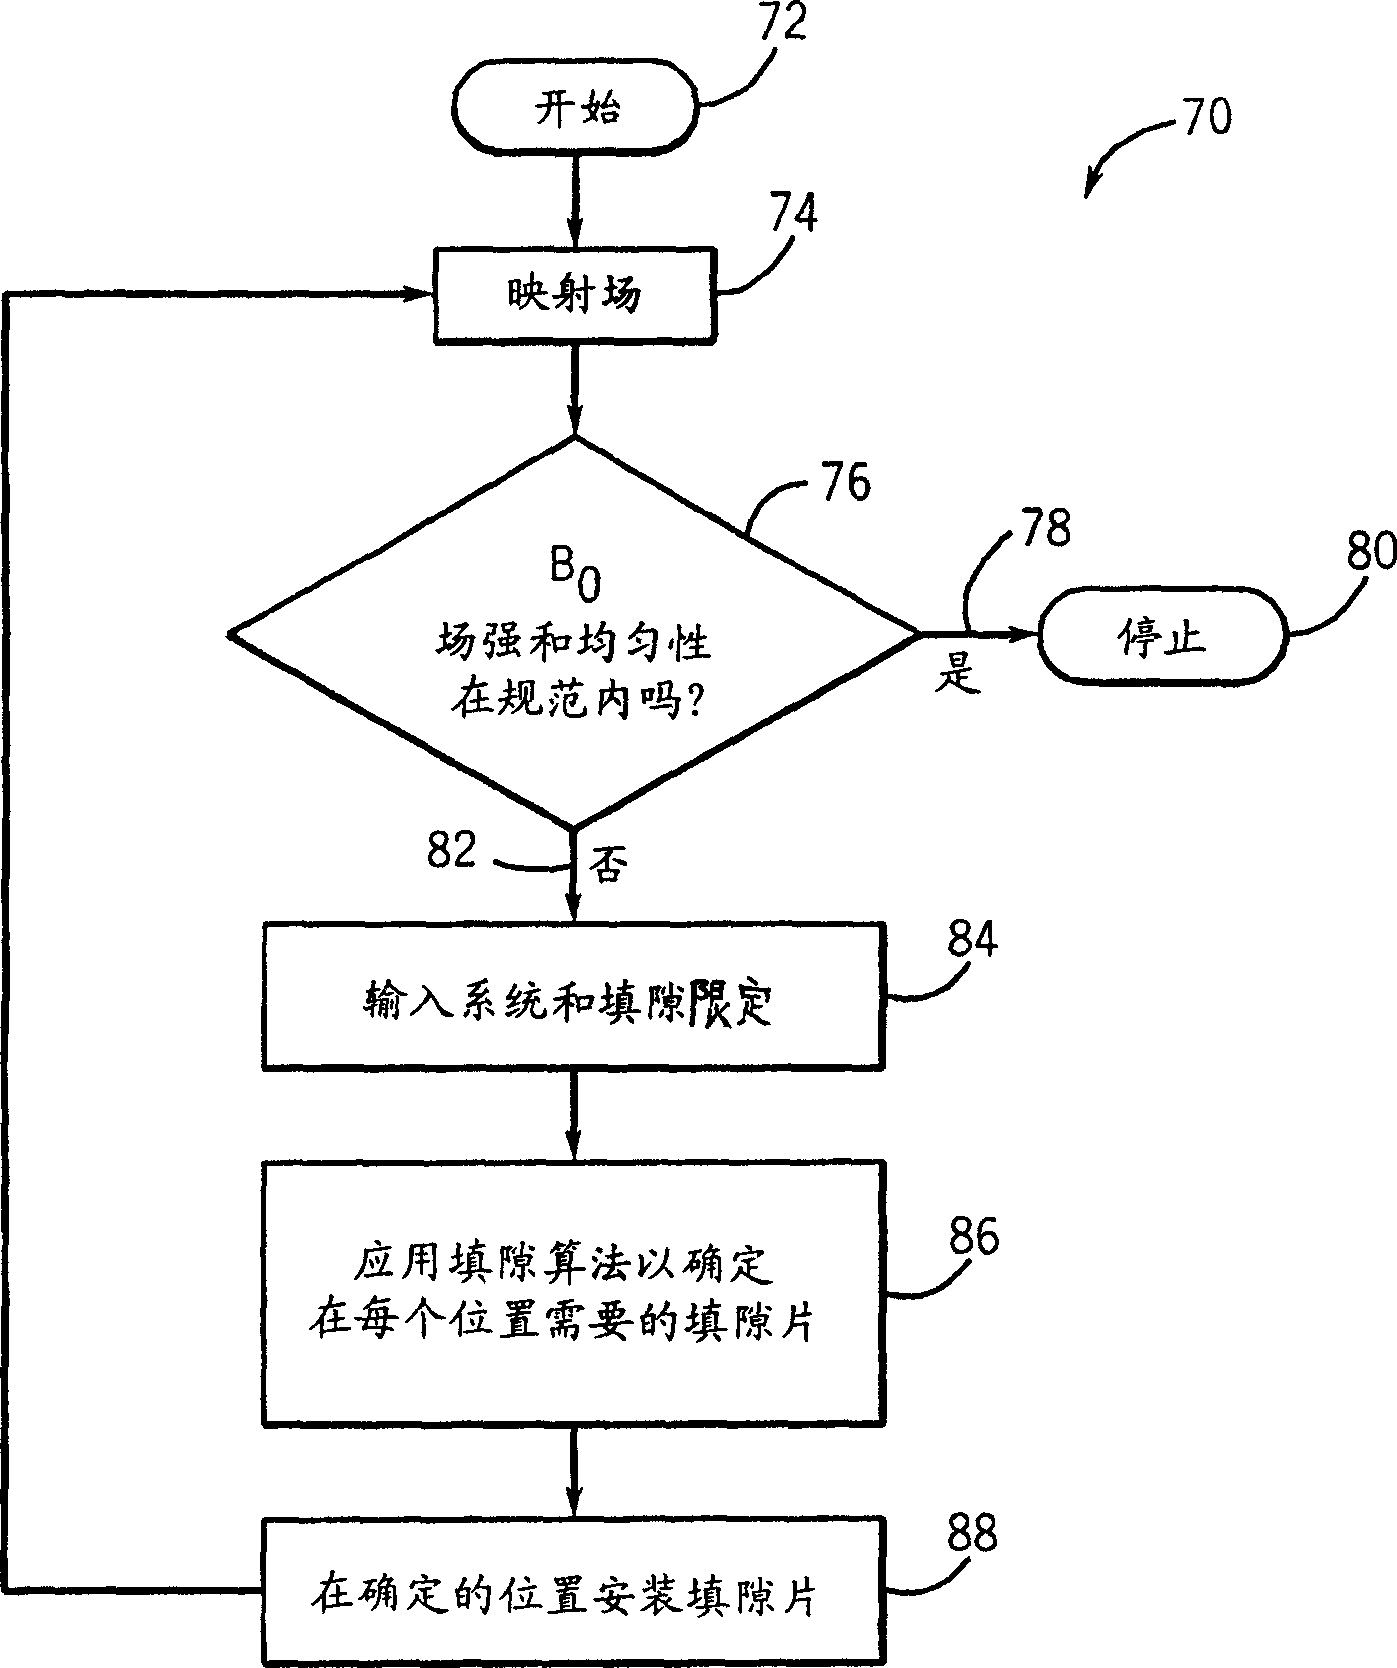 Method of magnetic field contarolled gap filling